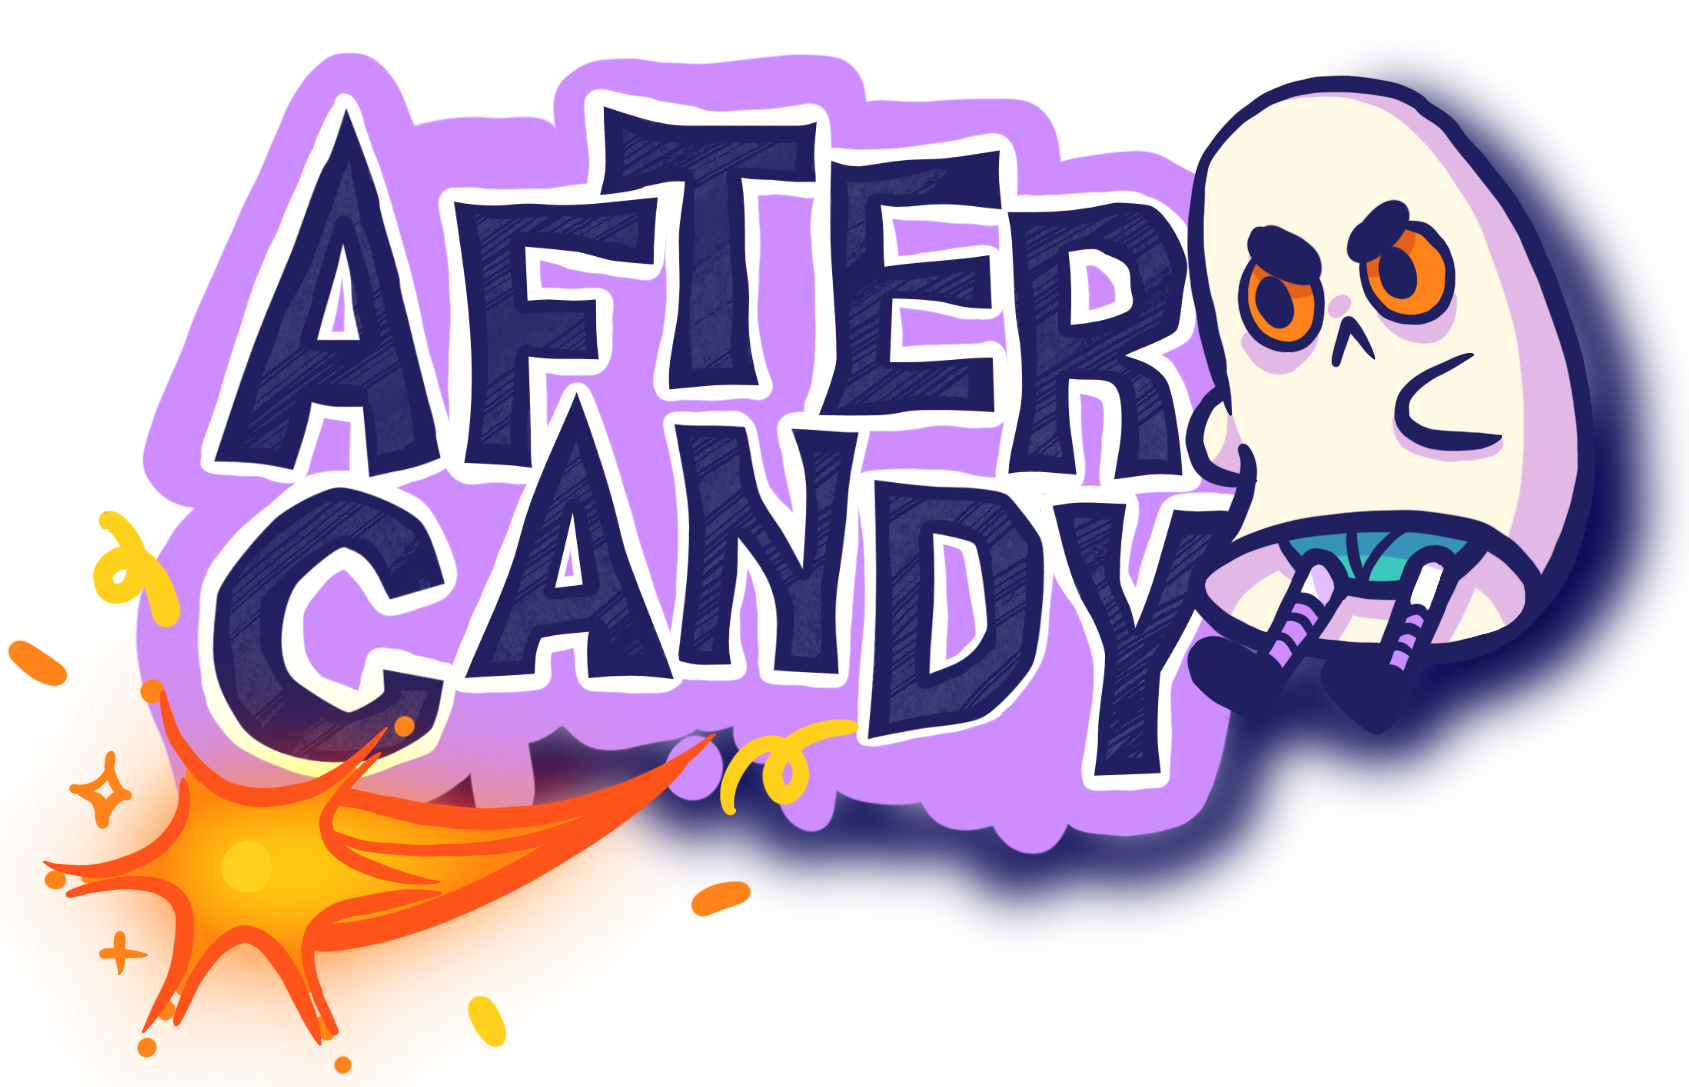 After Candy